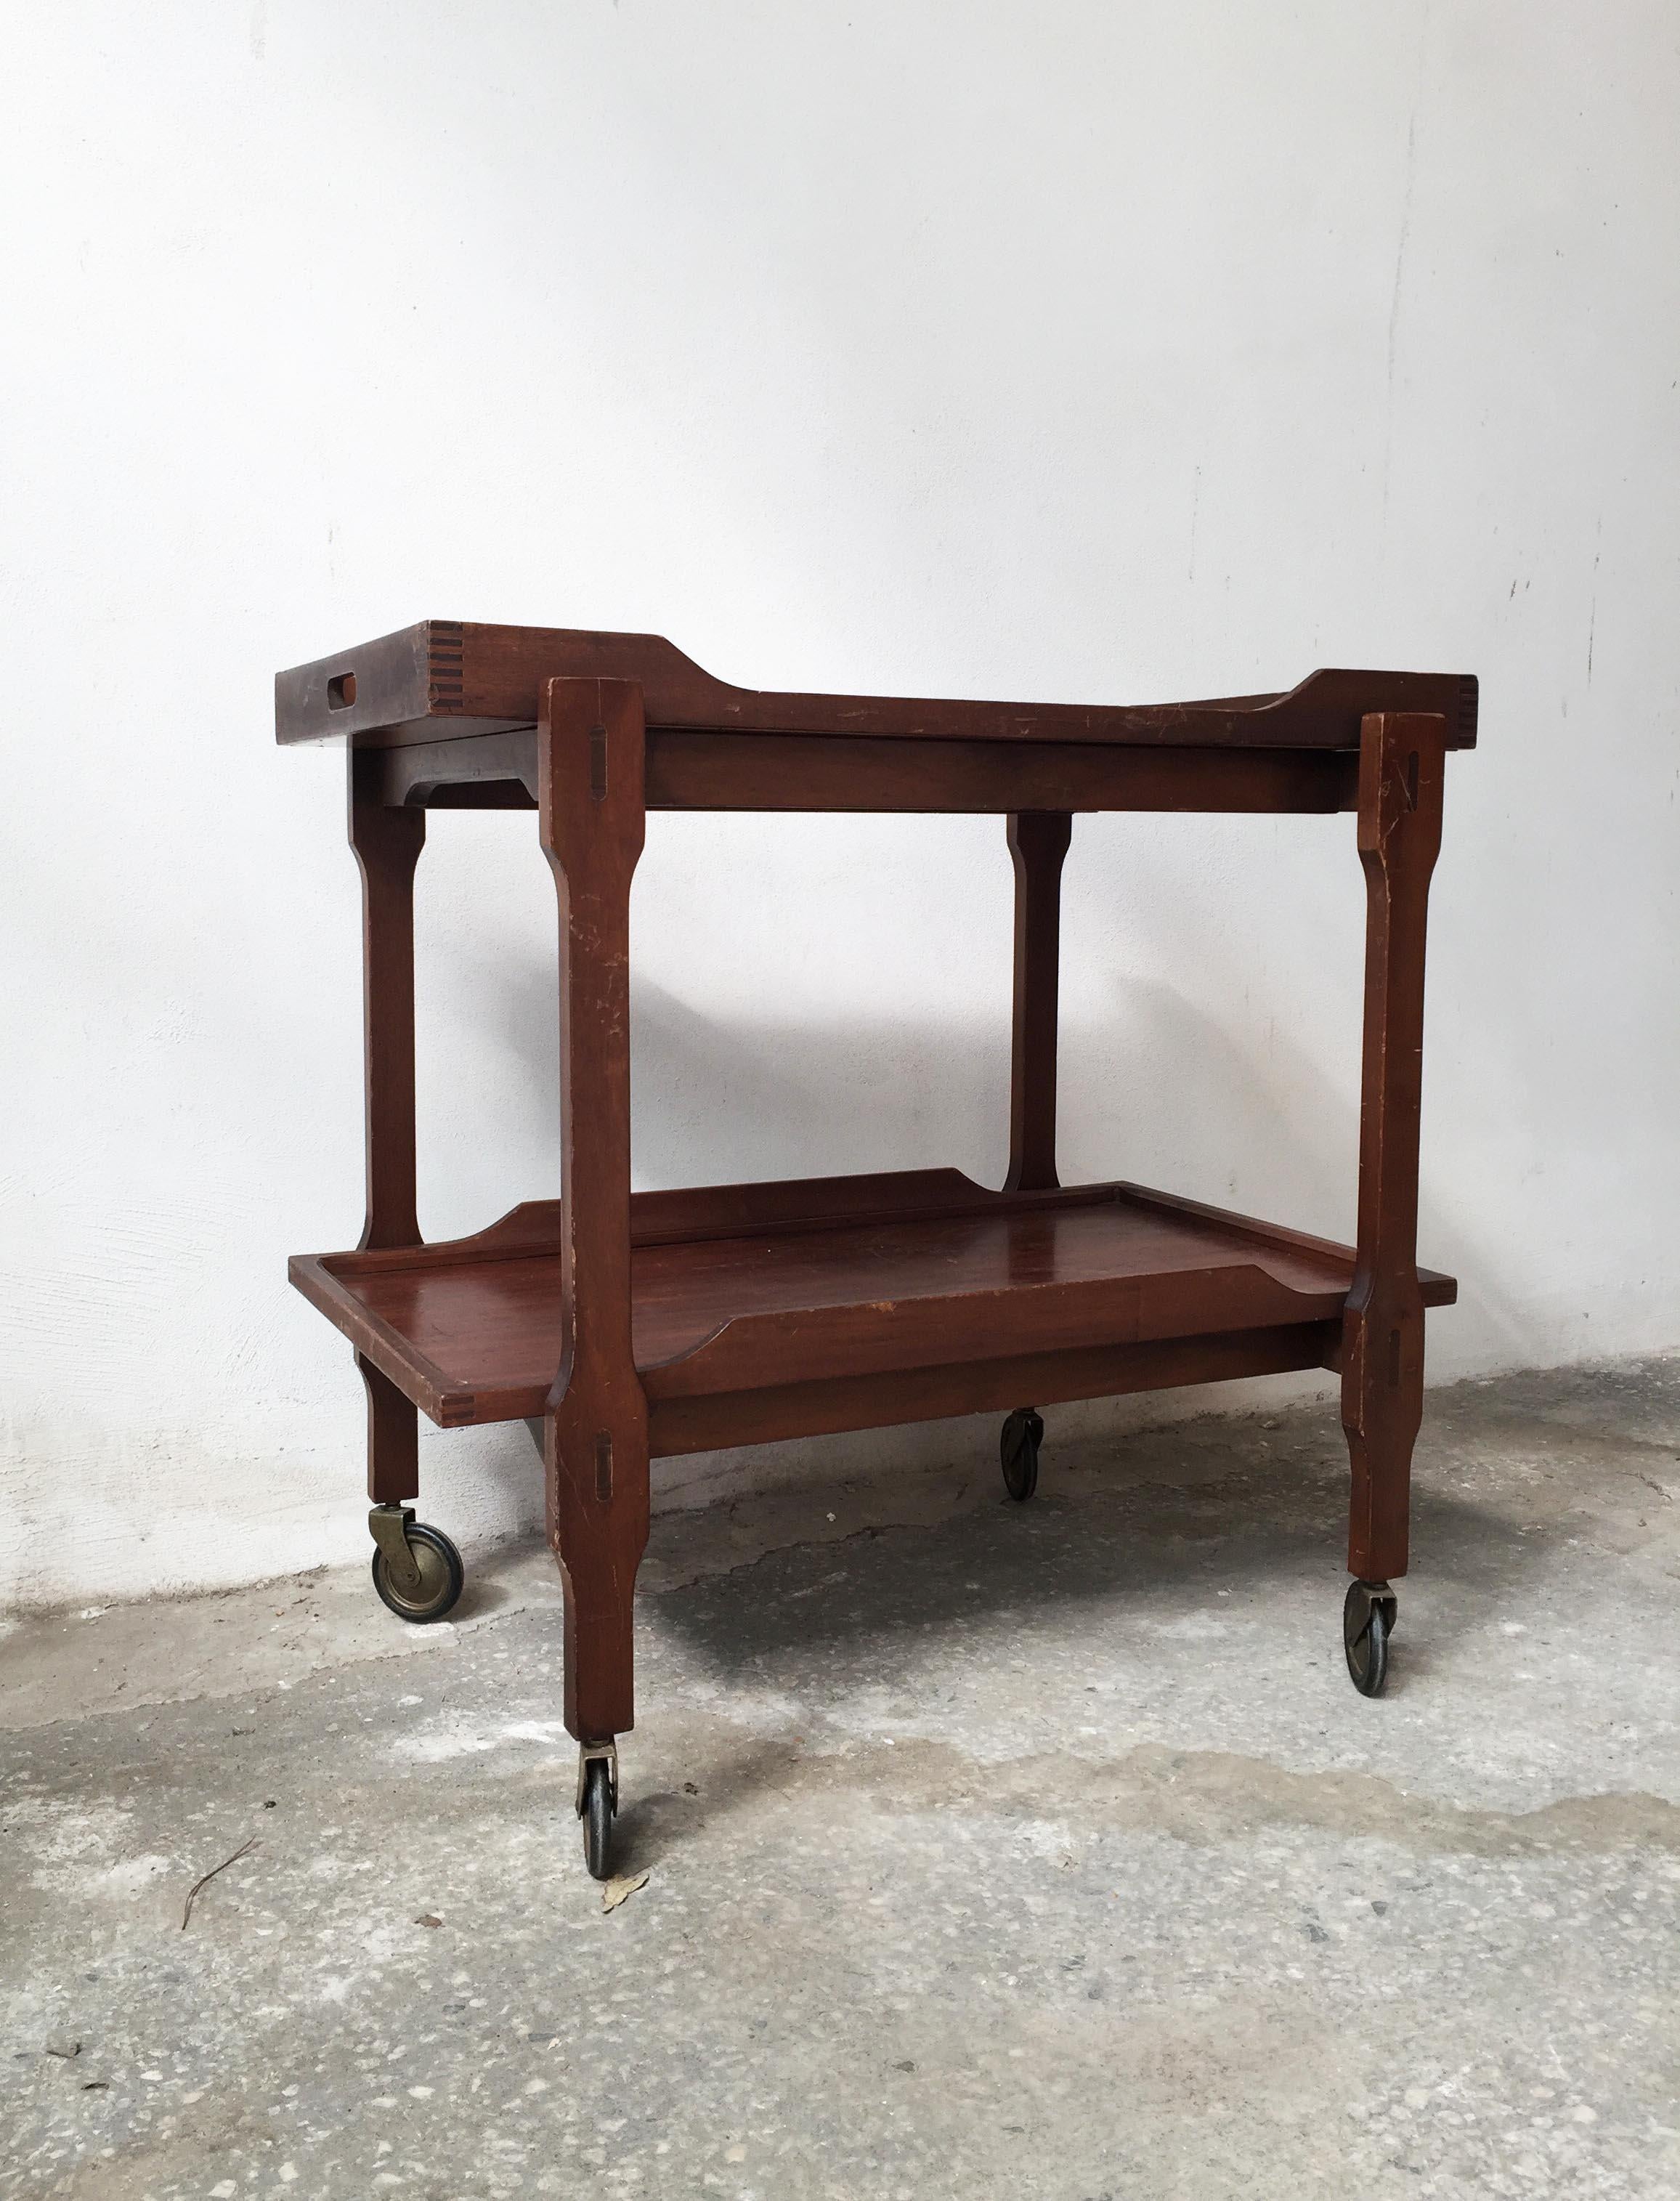 Scandinavian Bar Cart or Trolley in Mahogany Wood with Removable Tray, 1950s (Moderne der Mitte des Jahrhunderts) im Angebot